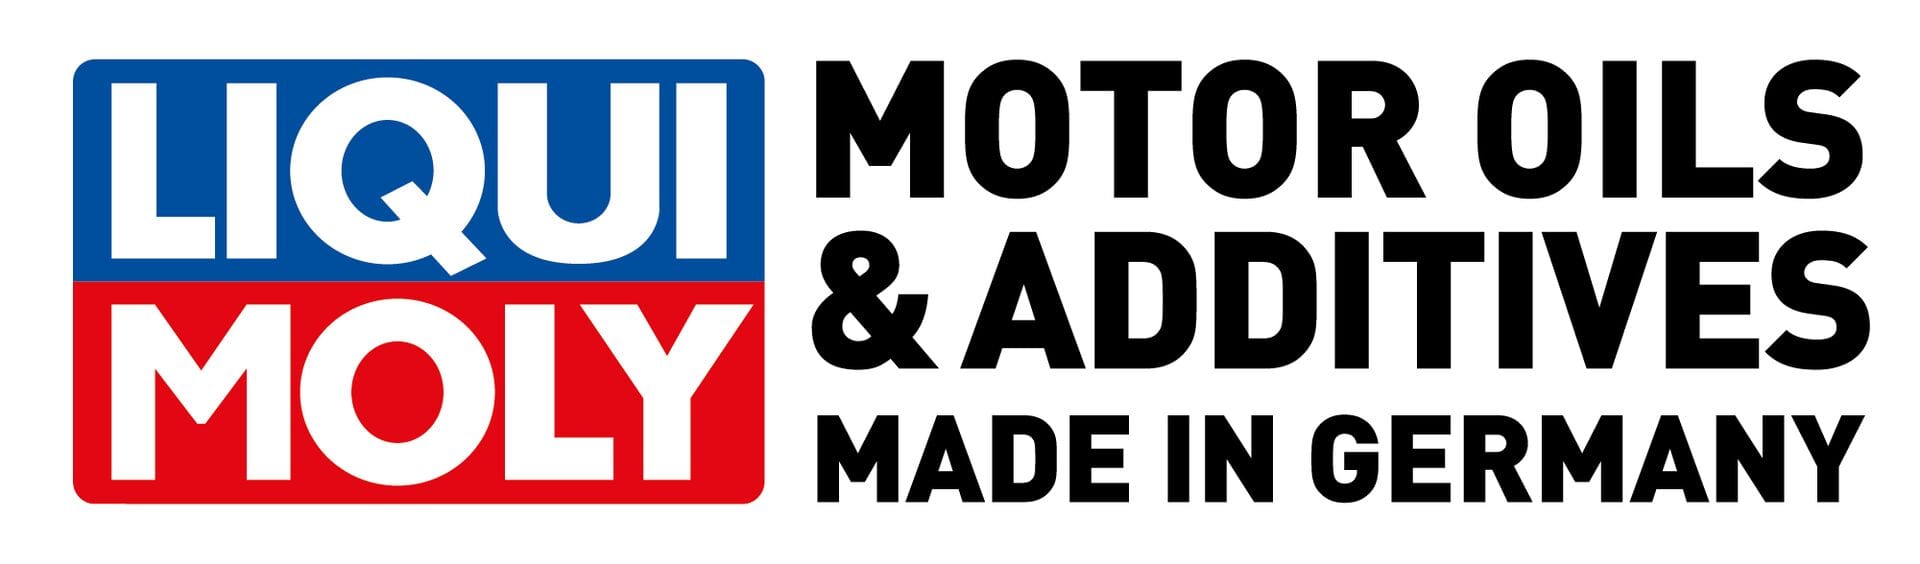 LIQUI MOLY Top Tec ATF 1800 (1L) - Automatic Transmission Fluid - Audi & Volkswagen ZF6 & ZF8 Gearboxes.